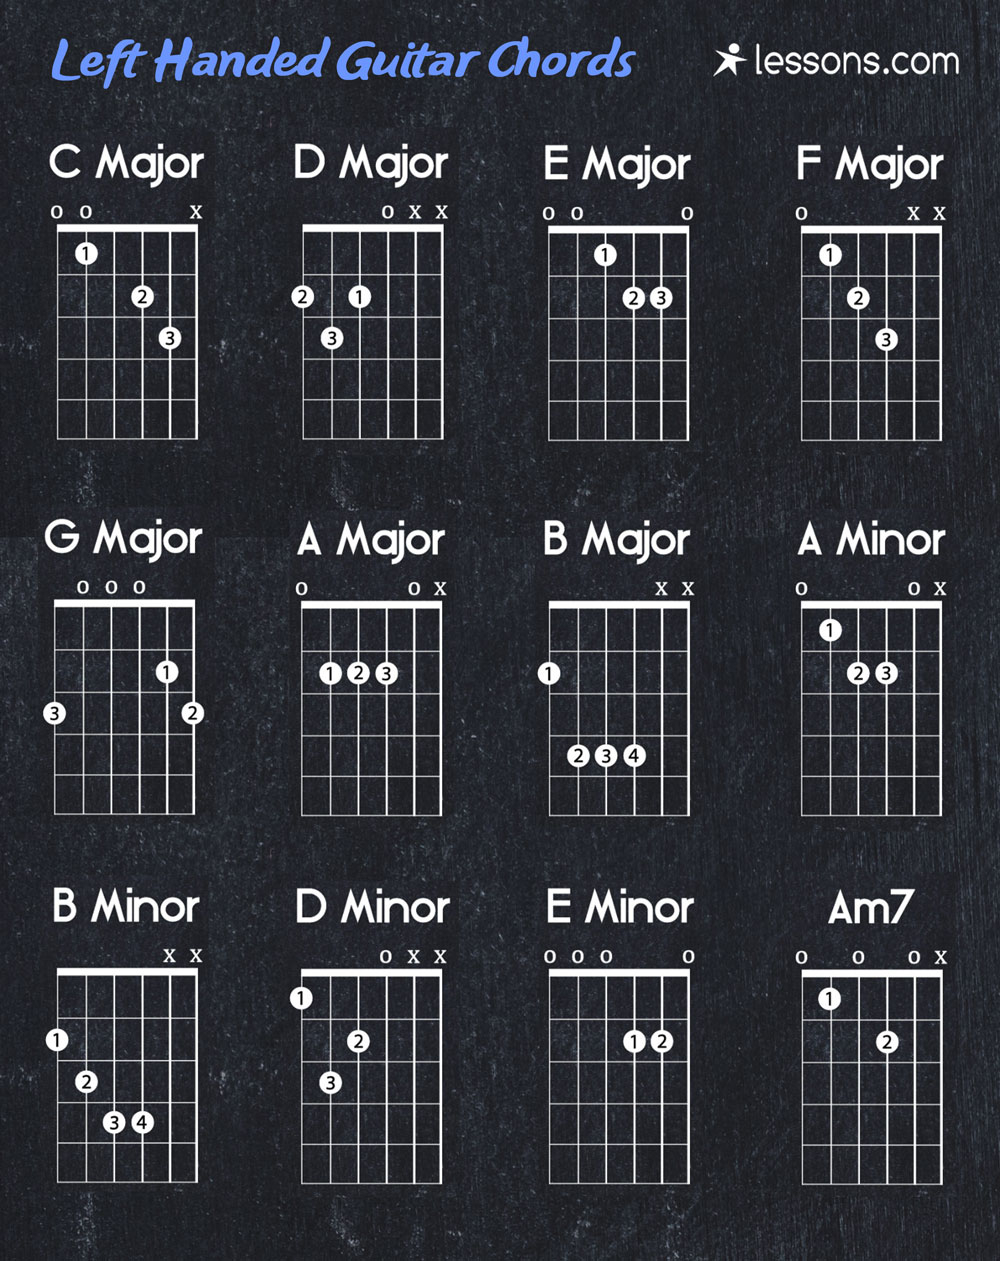 Guitar Chord Chart Right Lefty Guitar Chord Chart Guitar Chord Chart With Fingers